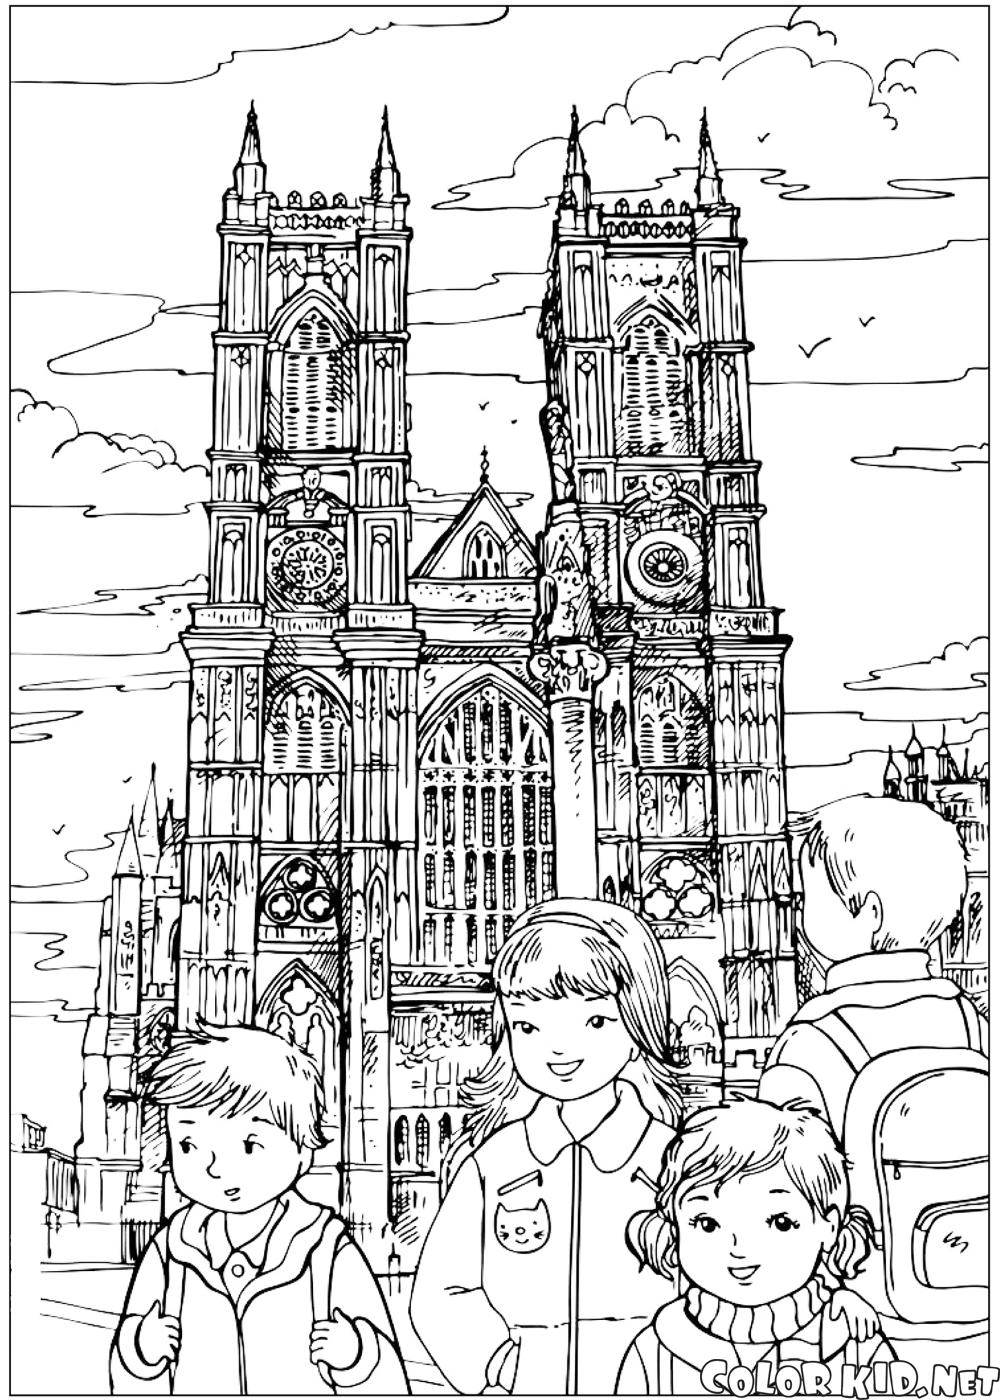 Coloring page - The United Kingdom